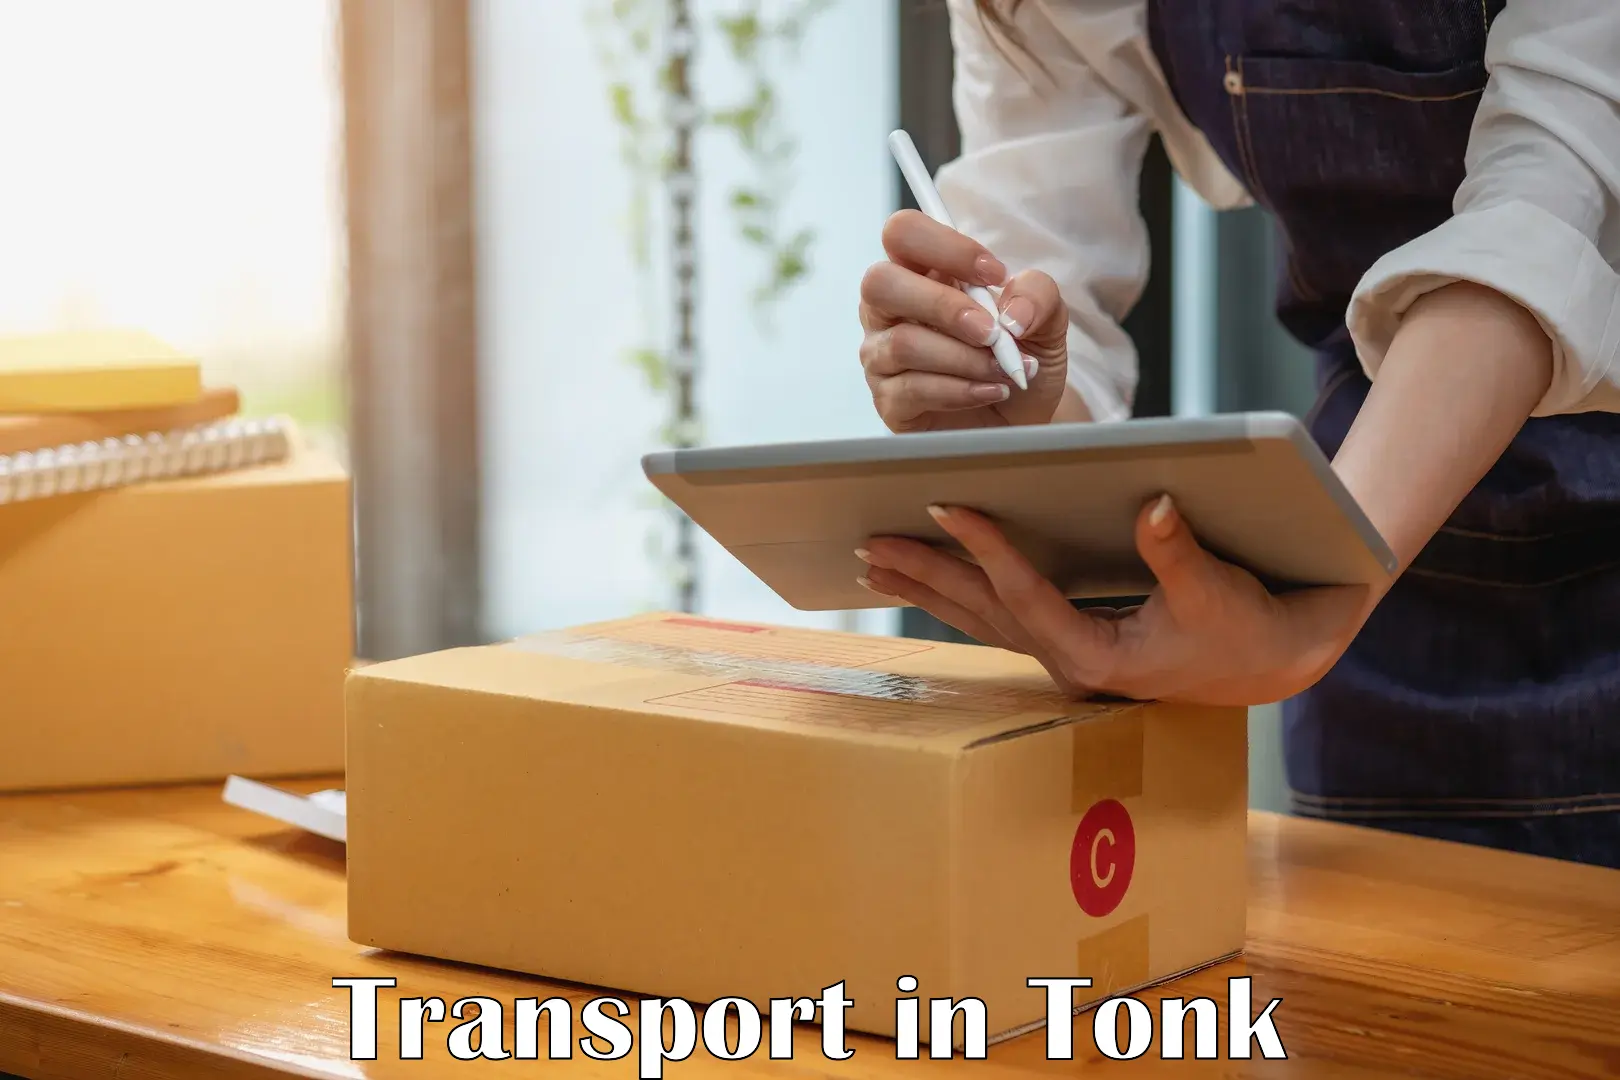 Express transport services in Tonk